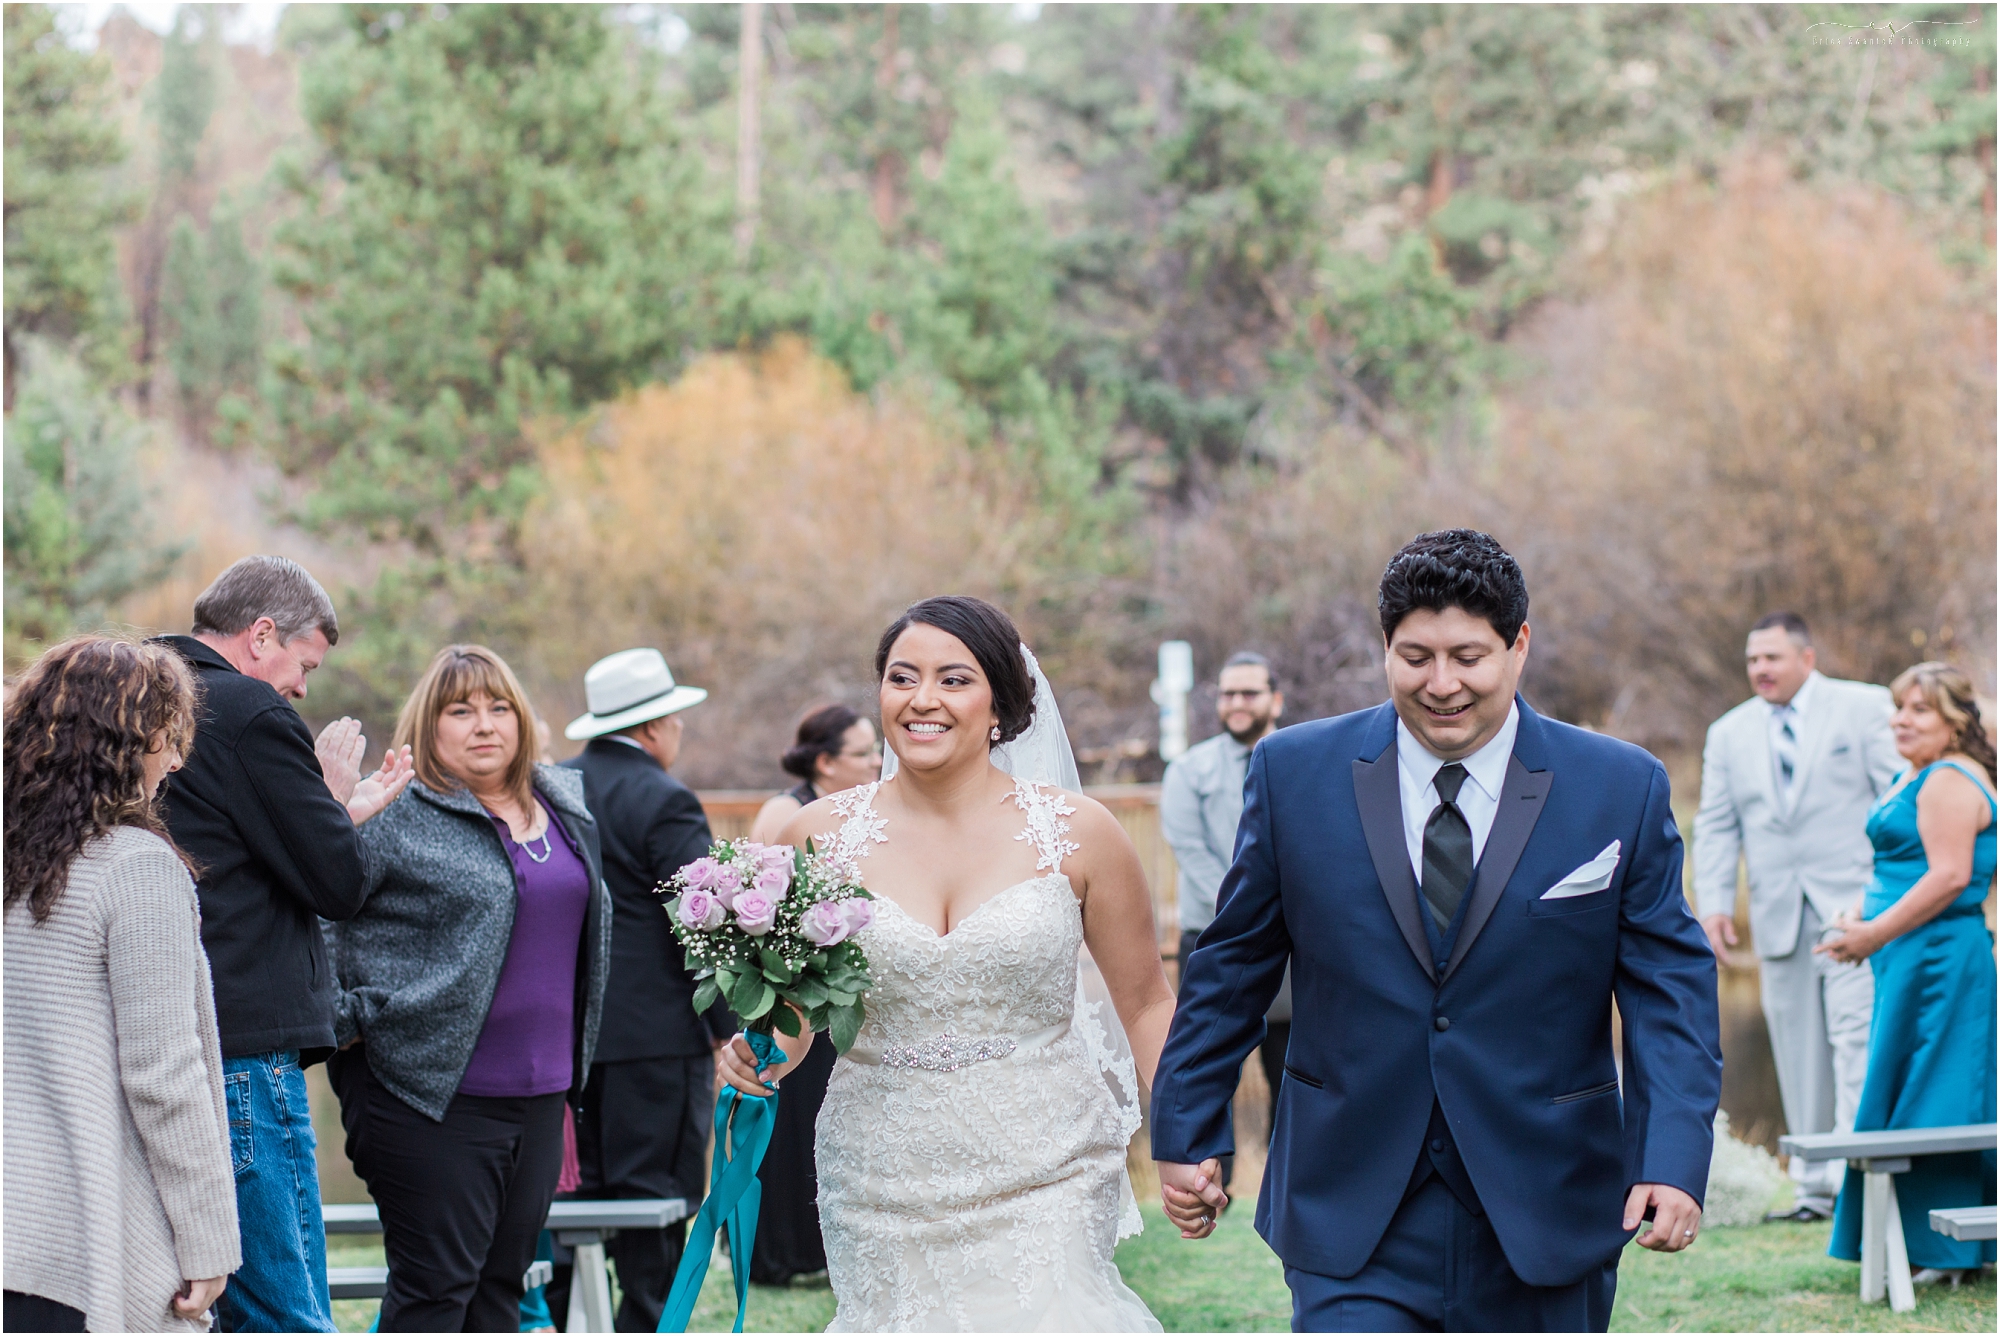 A newly pronounced husband & wife walk back down the aisle towards their reception at Aspen Hall in Bend, OR. 